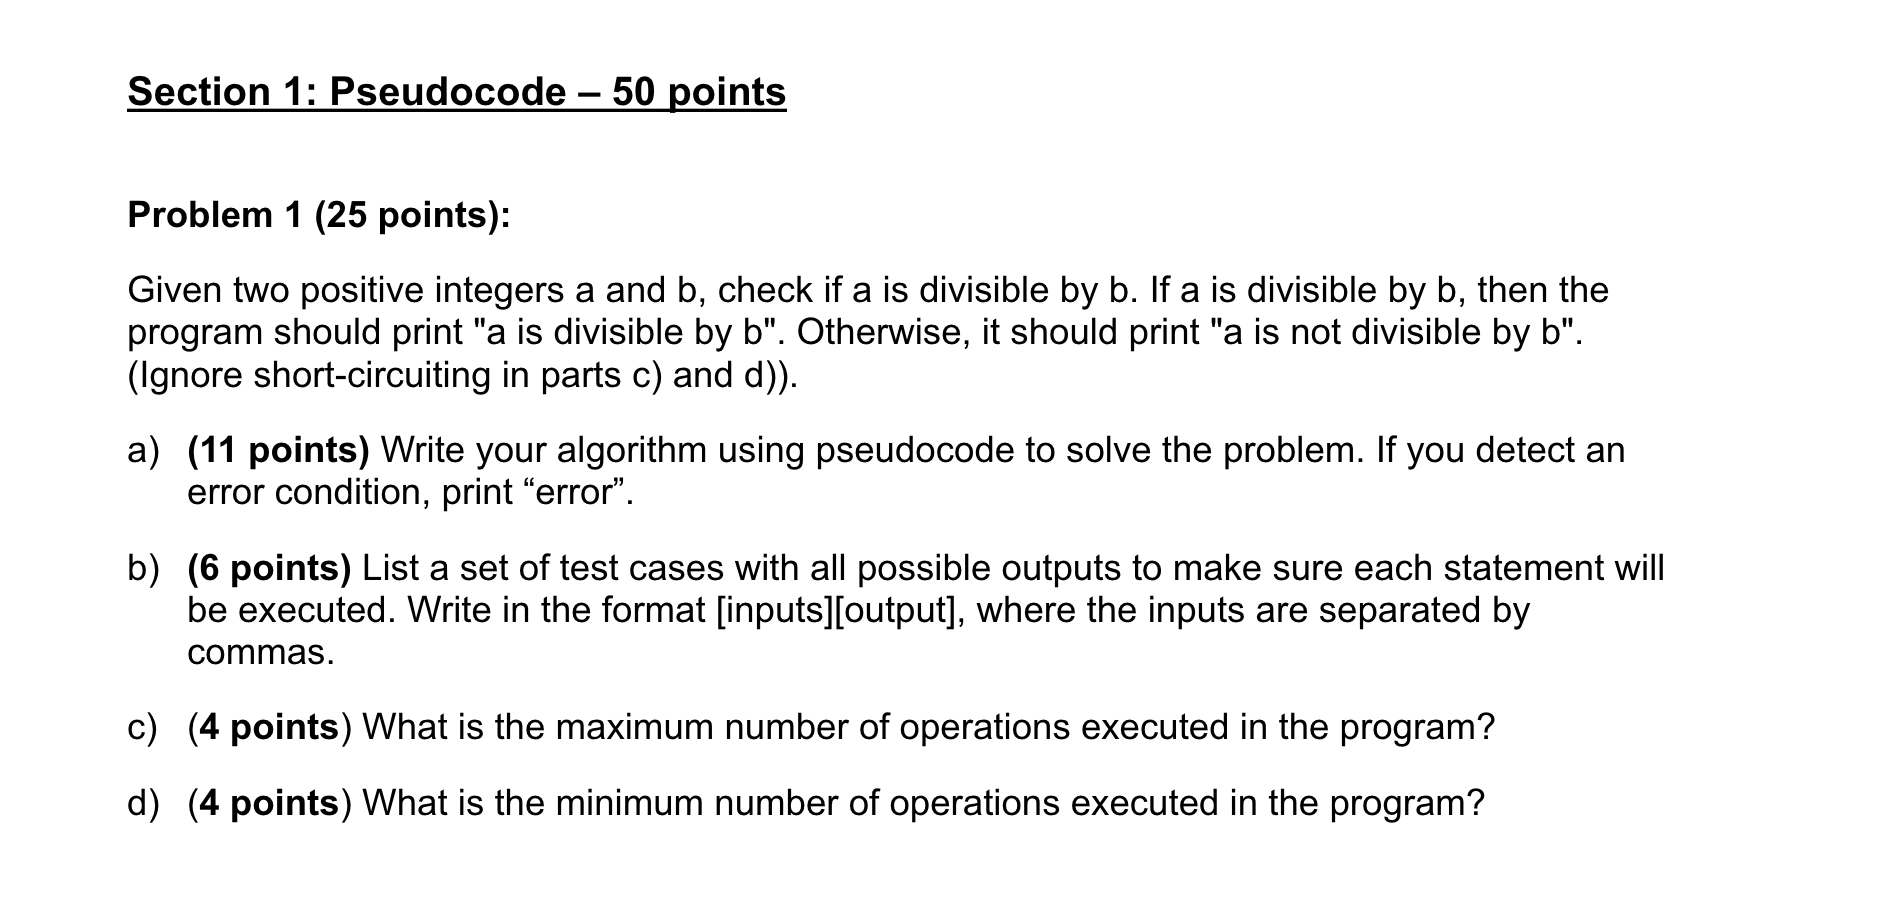 Section 1: Pseudocode - 50 points Problem 1 (25 points): Given two positive integers a and b, check if a is